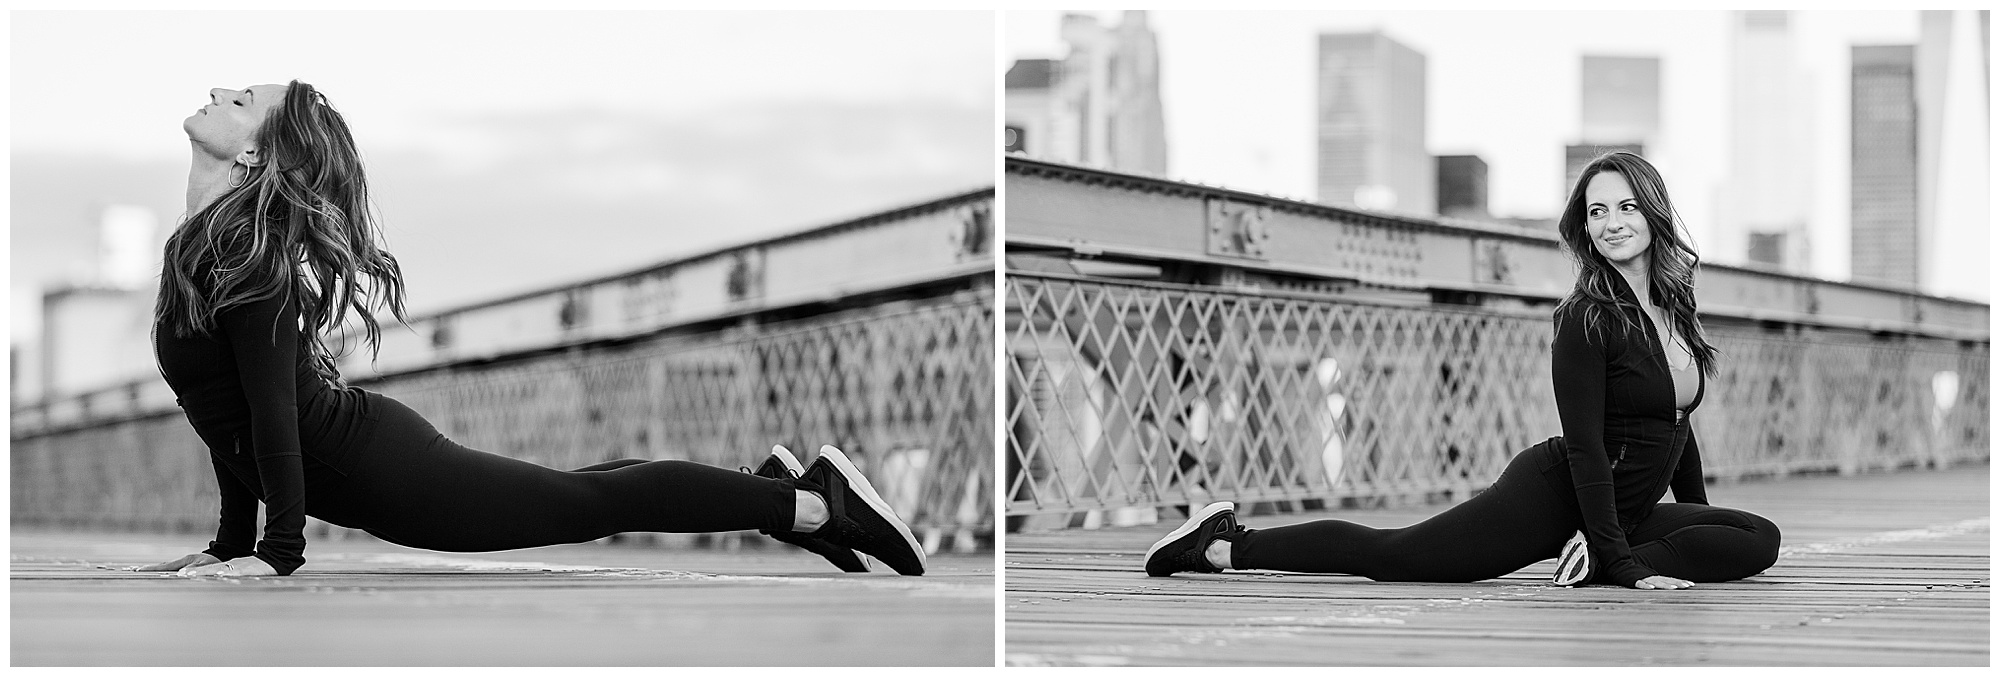 Personal fitness branding photos in NY